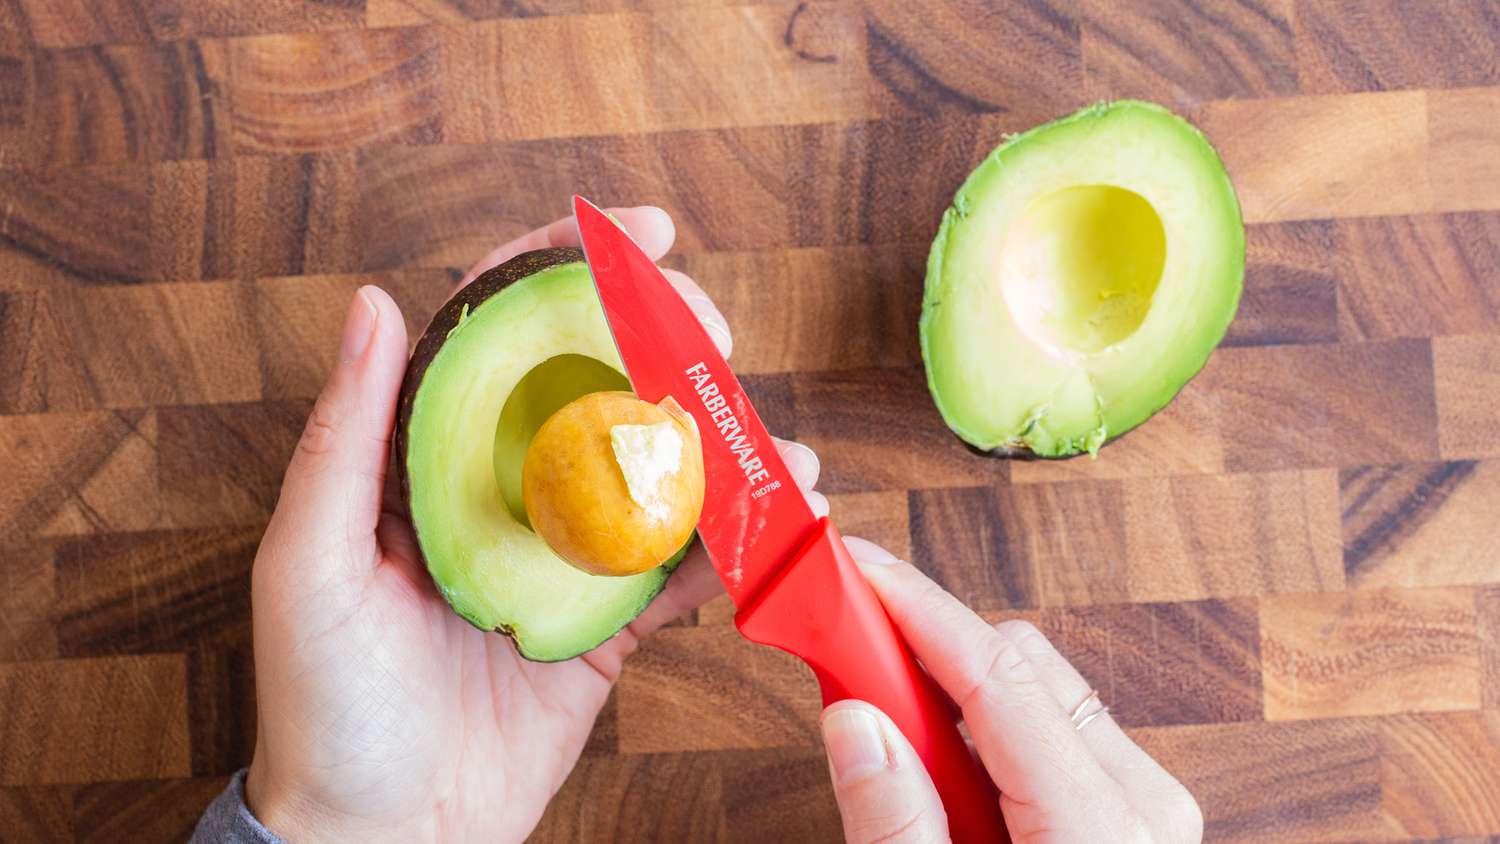 pitting an avocado with a red knife